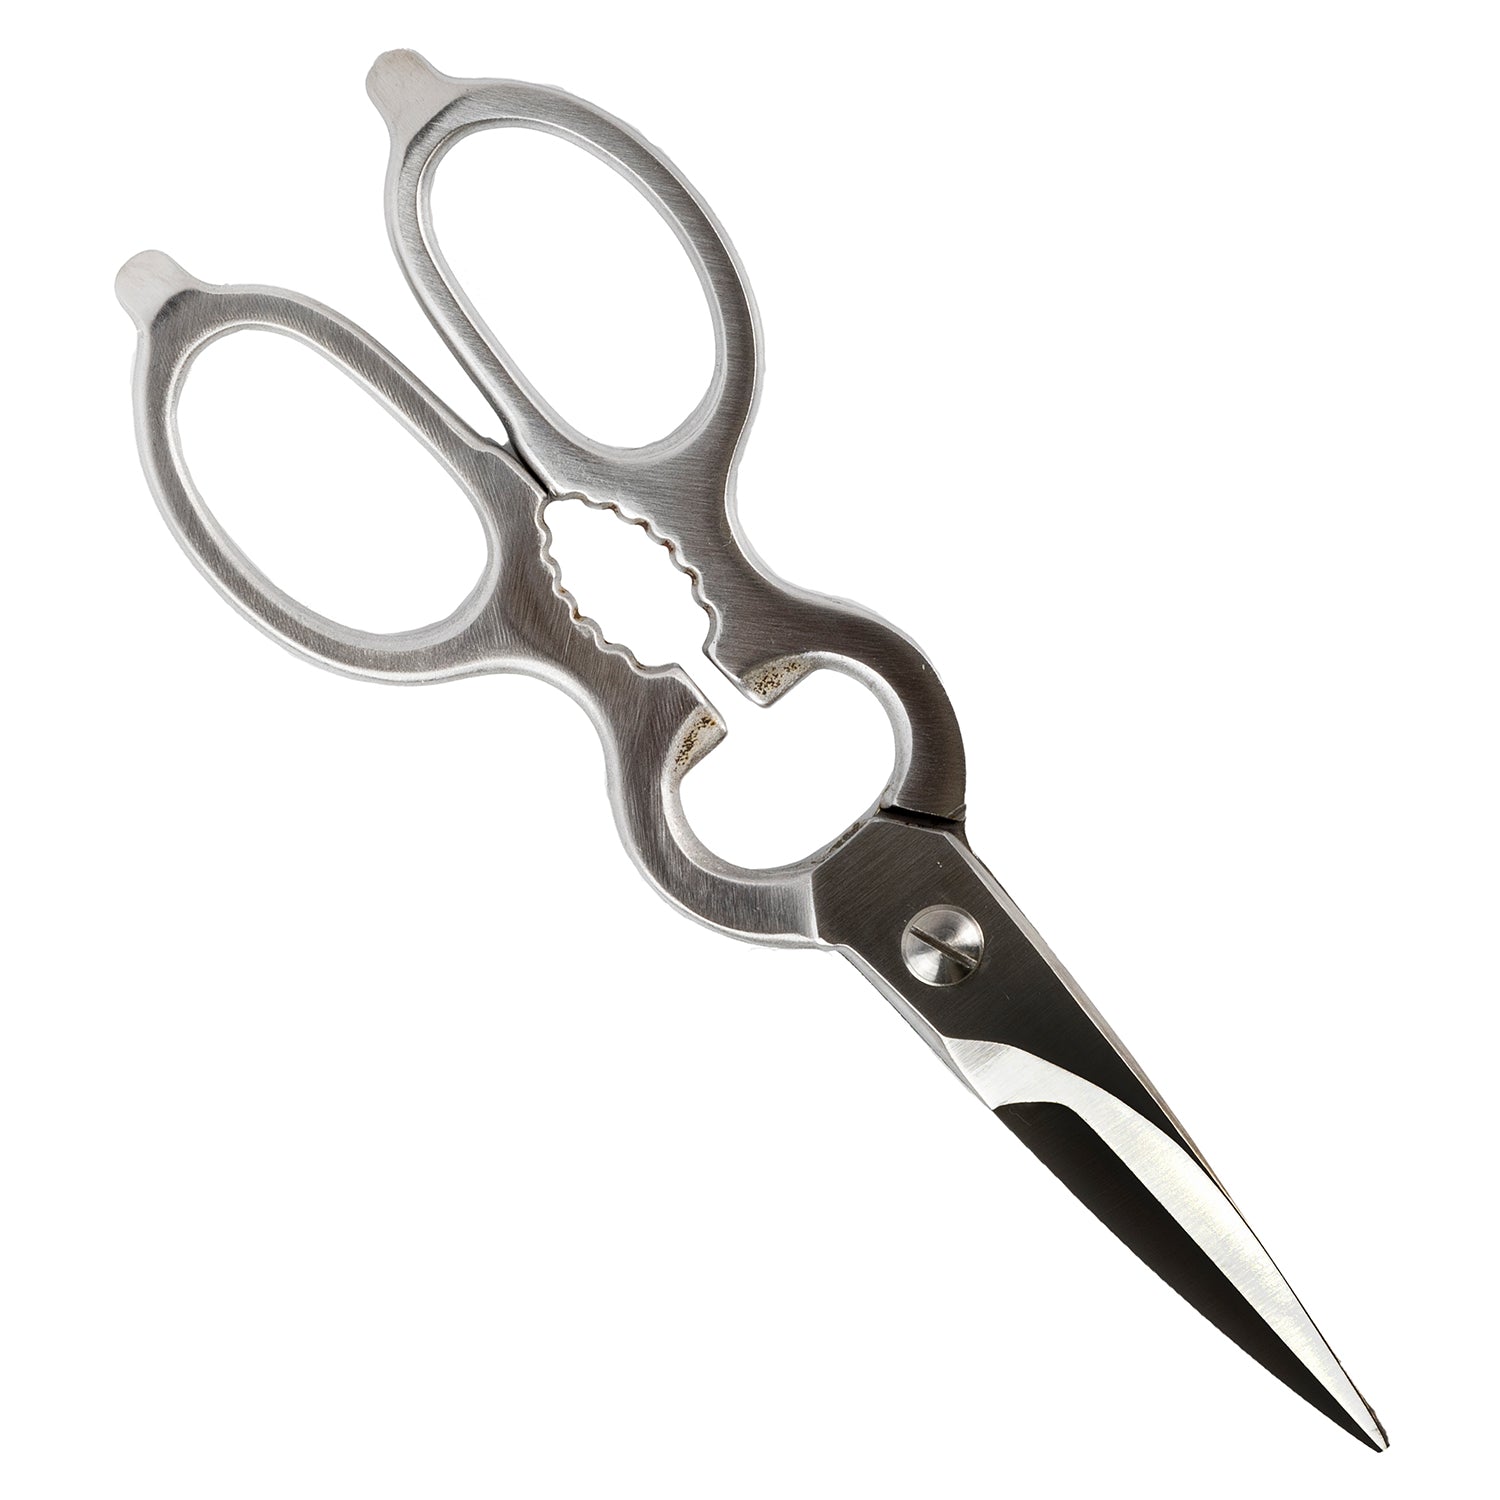 Global Stainless Steel Kitchen Shears 21cm - Cookin